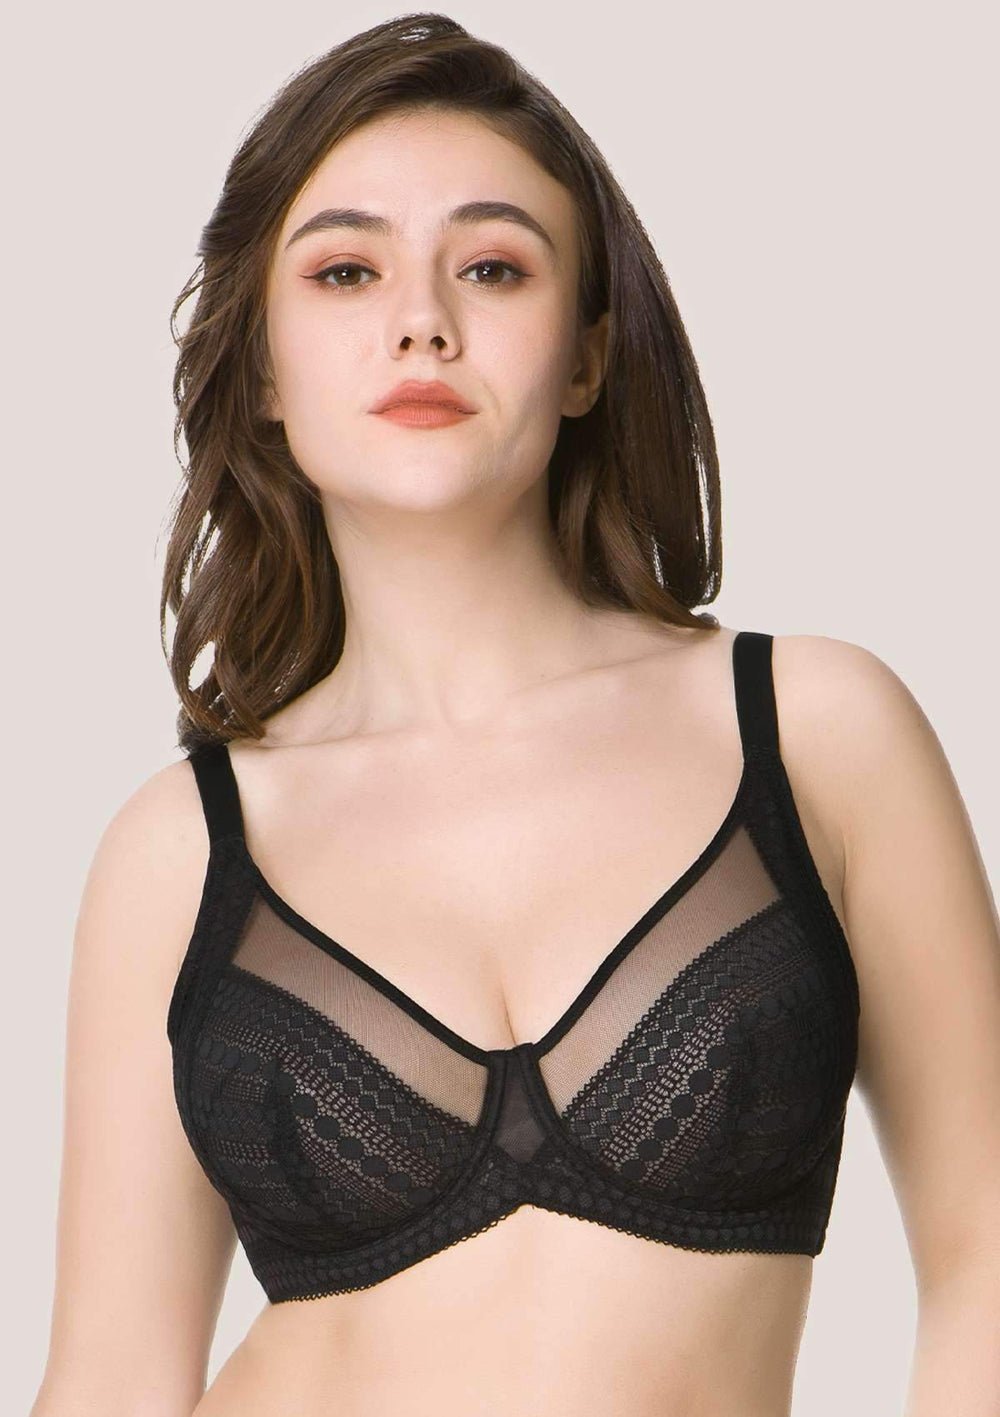 HSIA Bras Sale: Best Lifting Bra for Sagging Breasts